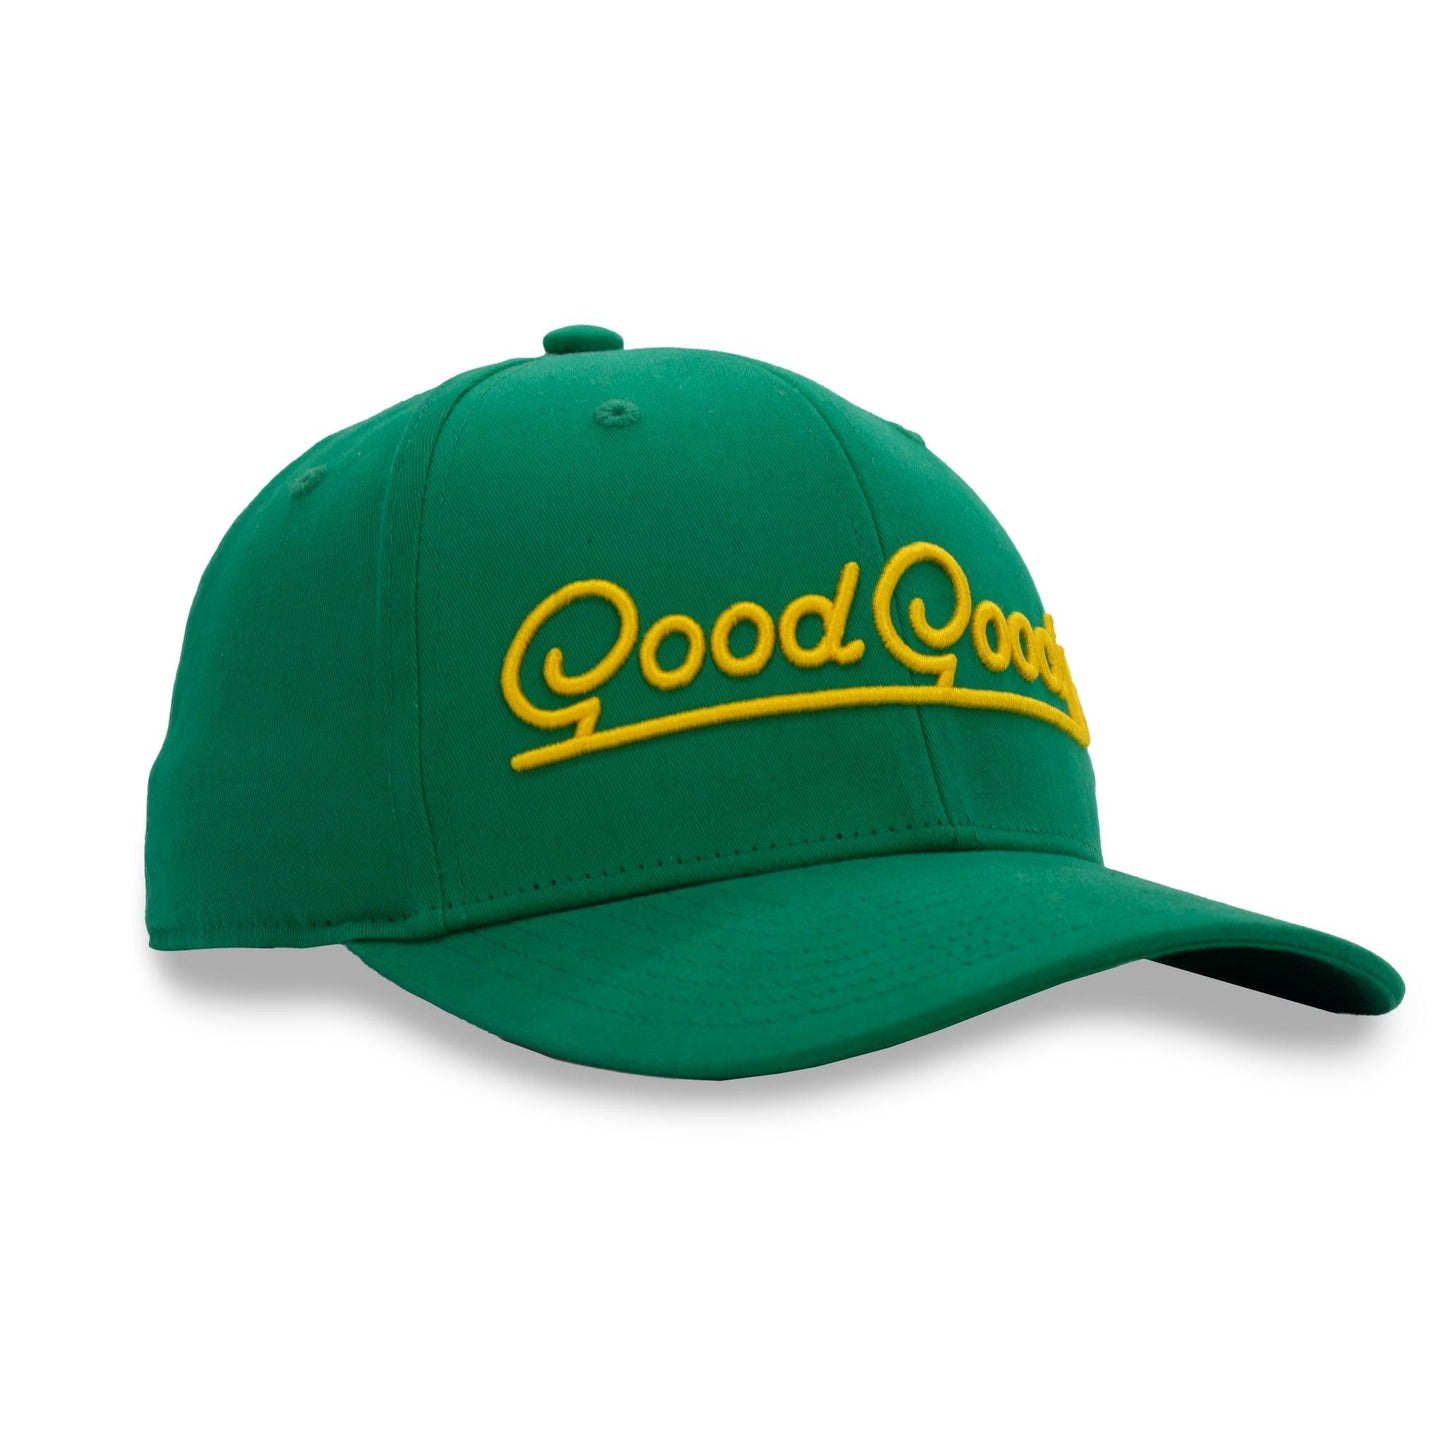 On The Range Hat - Exclusive Golf Hat From Good Good Golf